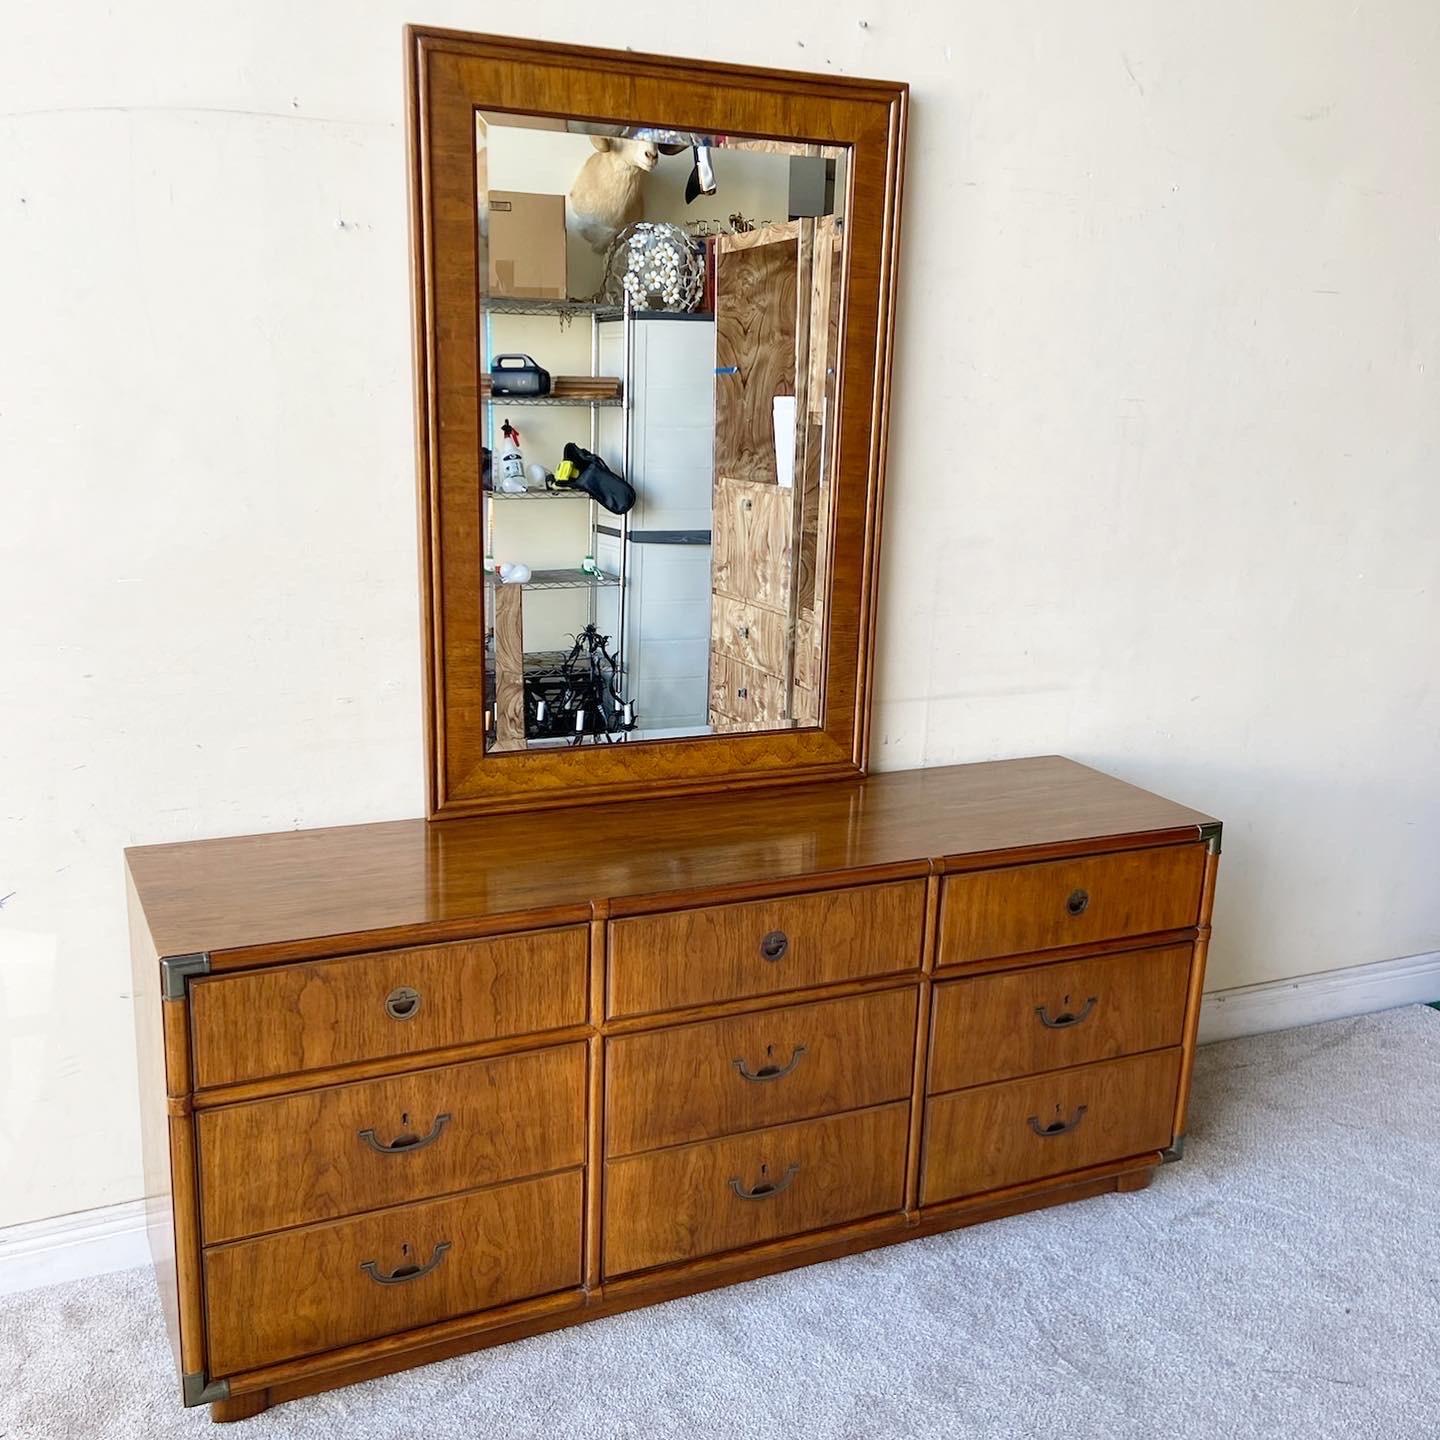 Incredible vintage Accolade campaign dresser with mirror by Drexel Heritage. Features 9 spacious drawers with inlaid brass drawer pulls. Dresser is on wheels.

Mirror measures 33.75” W, 1.25” D, 47.75” H.